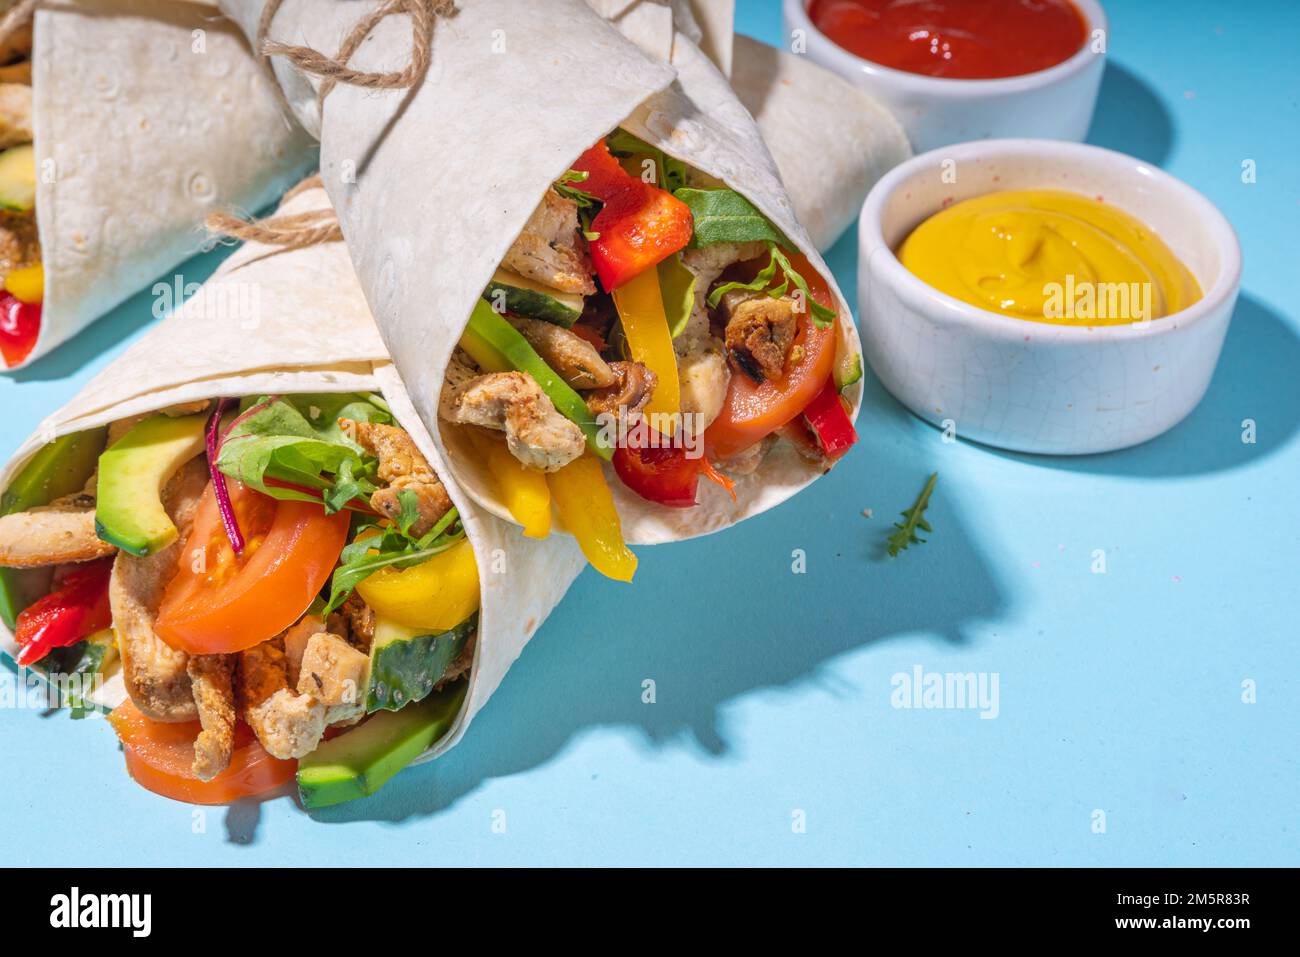 Classic street food shawarma or burrito, healthy sandwich wrapped in tortilla flat bread with fried chicken meat, fresh vegetables, sauce, on bright b Stock Photo